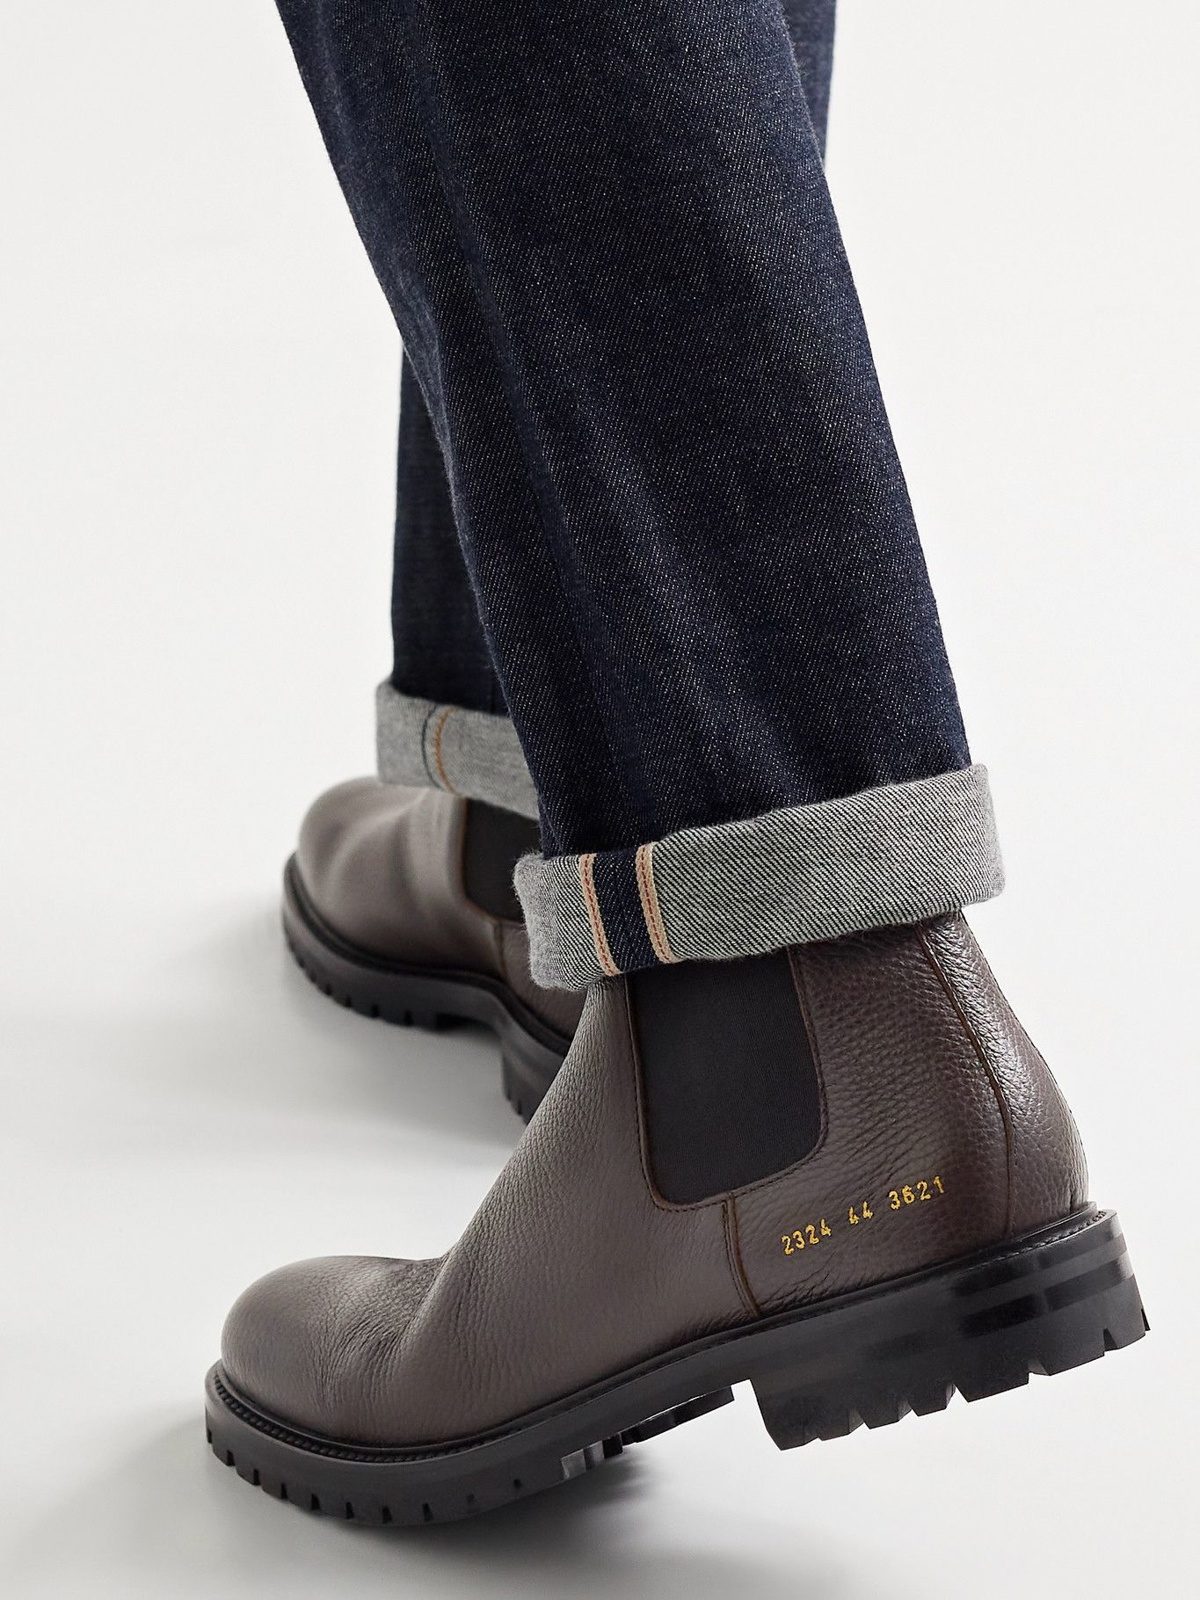 Common - Full-Grain Leather Boots - Brown Common Projects